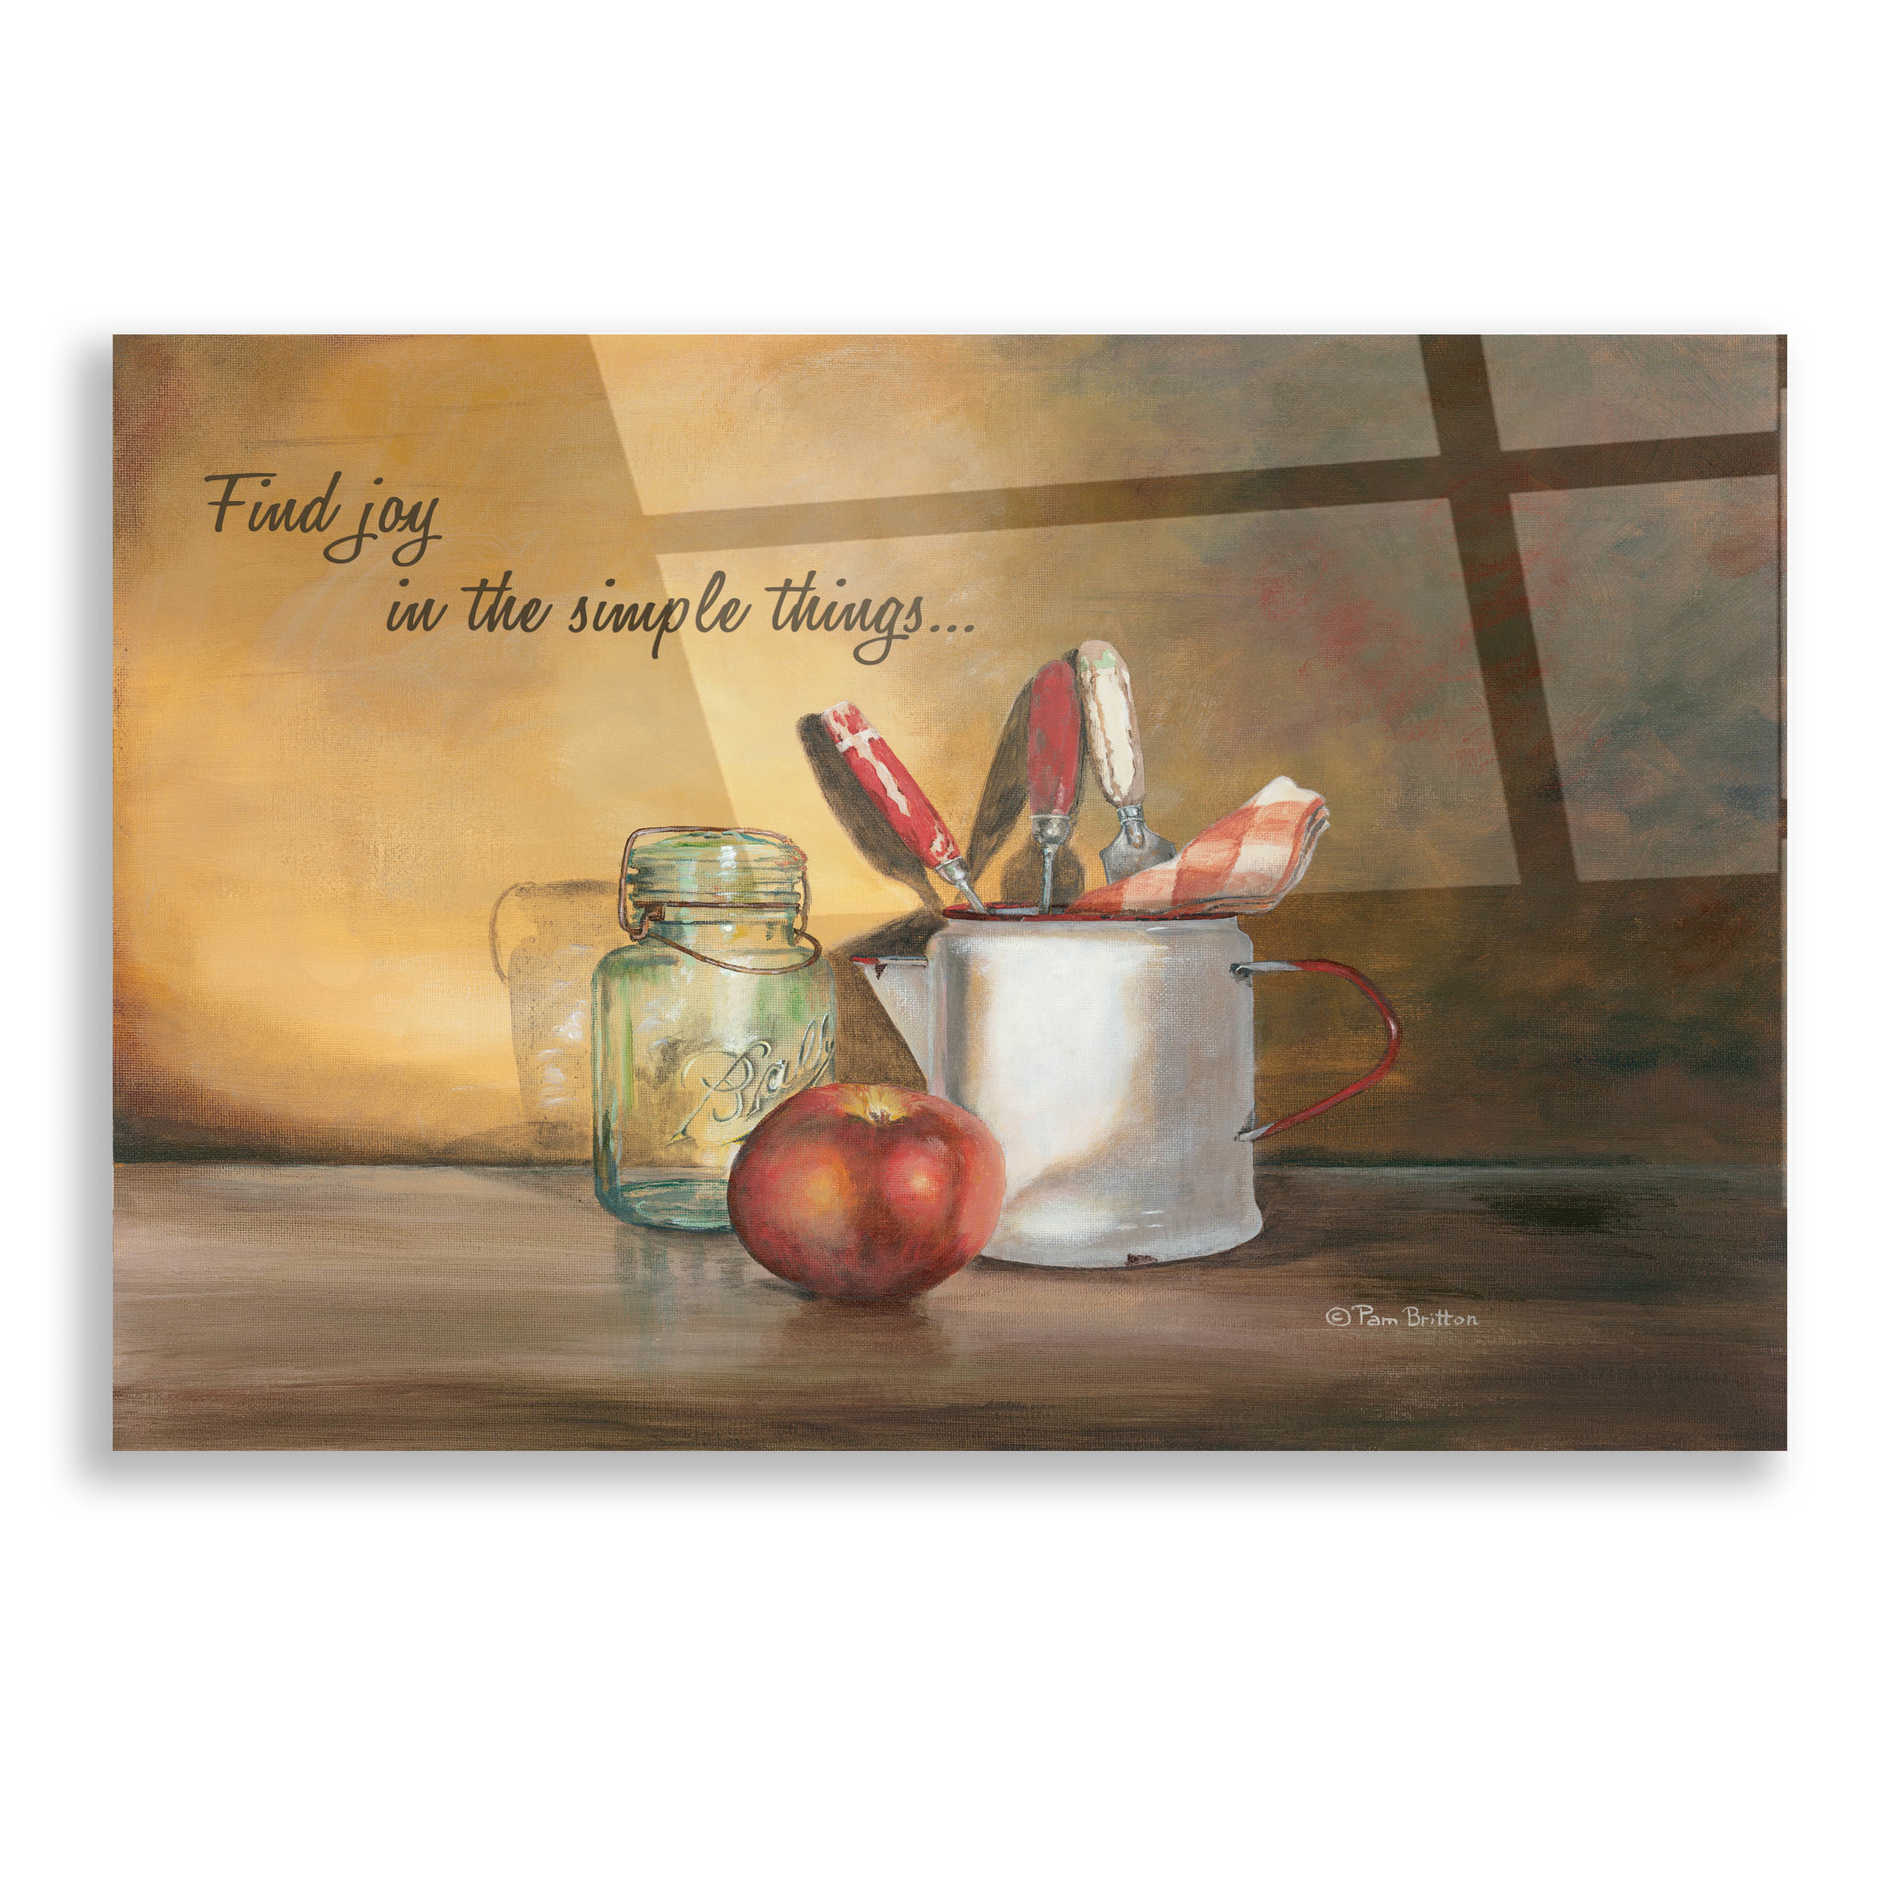 Epic Art 'Find Joy in the Simple Things' by Pam Britton, Acrylic Glass Wall Art,16x12